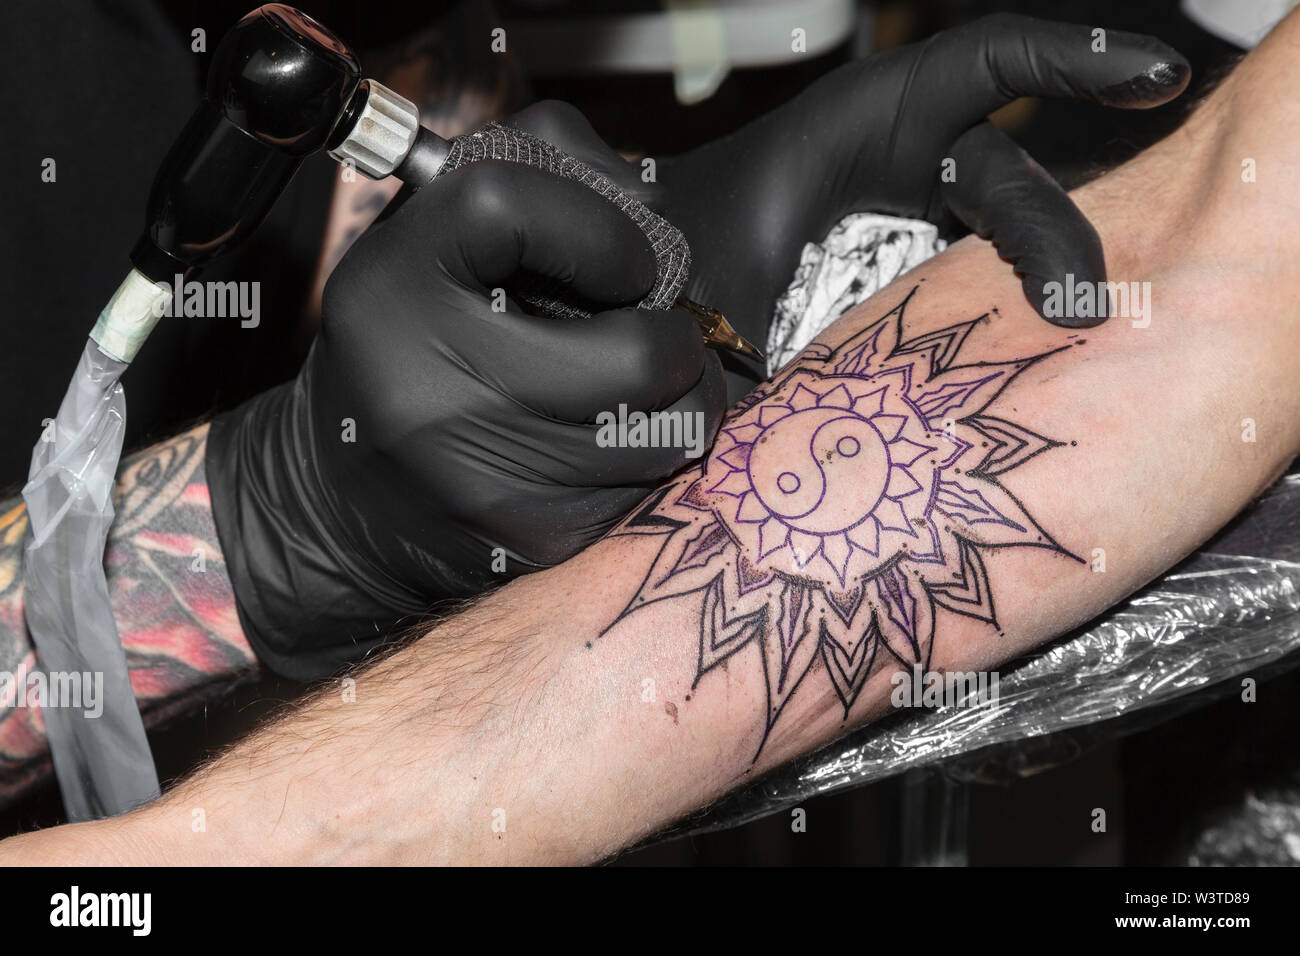 Tattoo in form of circular pattern on man's arm Stock Photo - Alamy